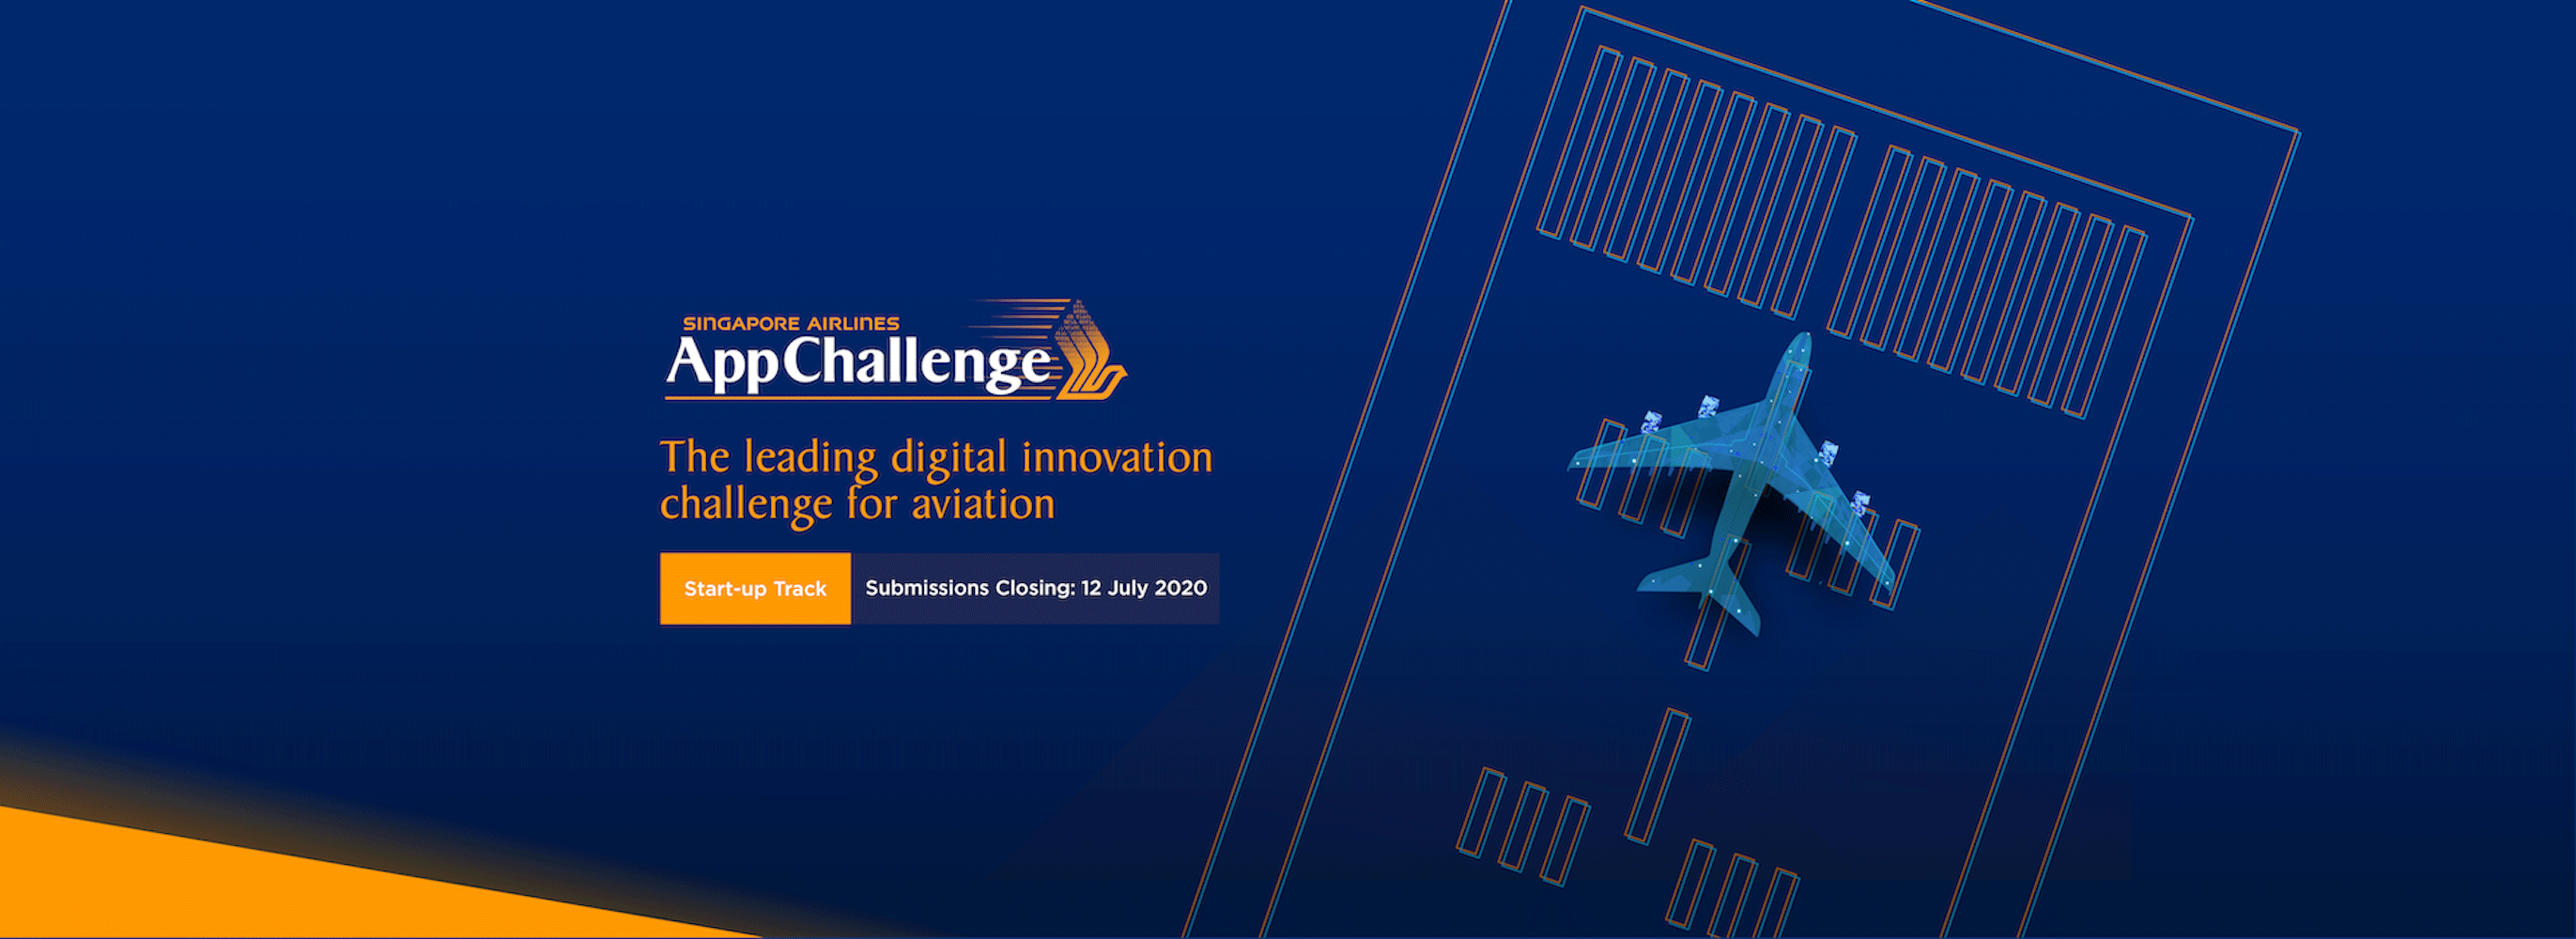 Singapore Airlines AppChallenge 2020